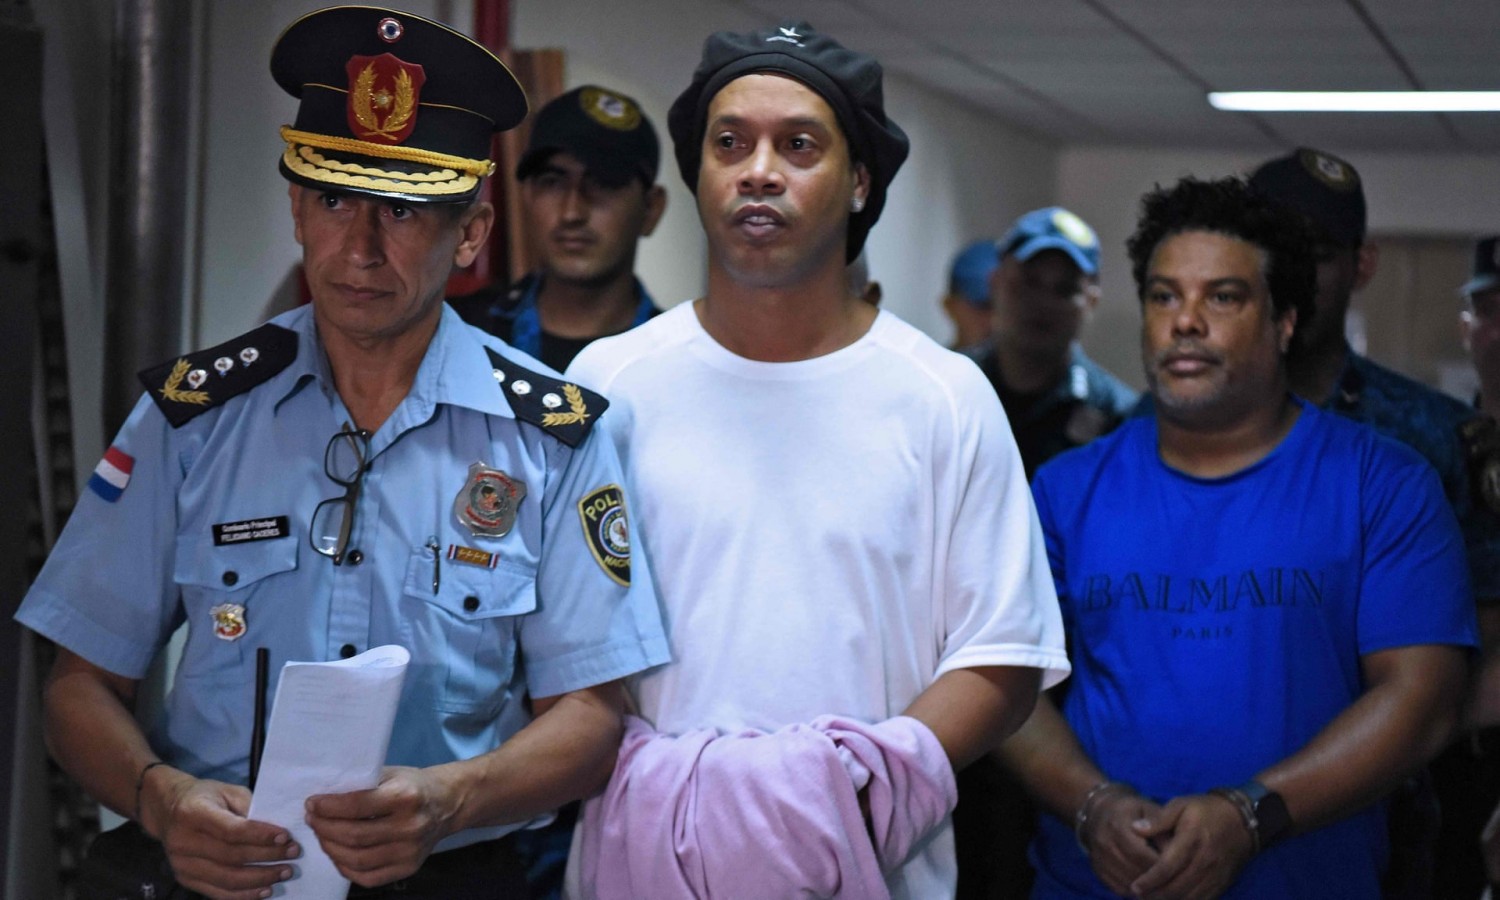 Ronaldinho and his brother arriving at his trial in Asunción, Paraguay. Photograph: Norberto Duarte/AFP via Getty Images